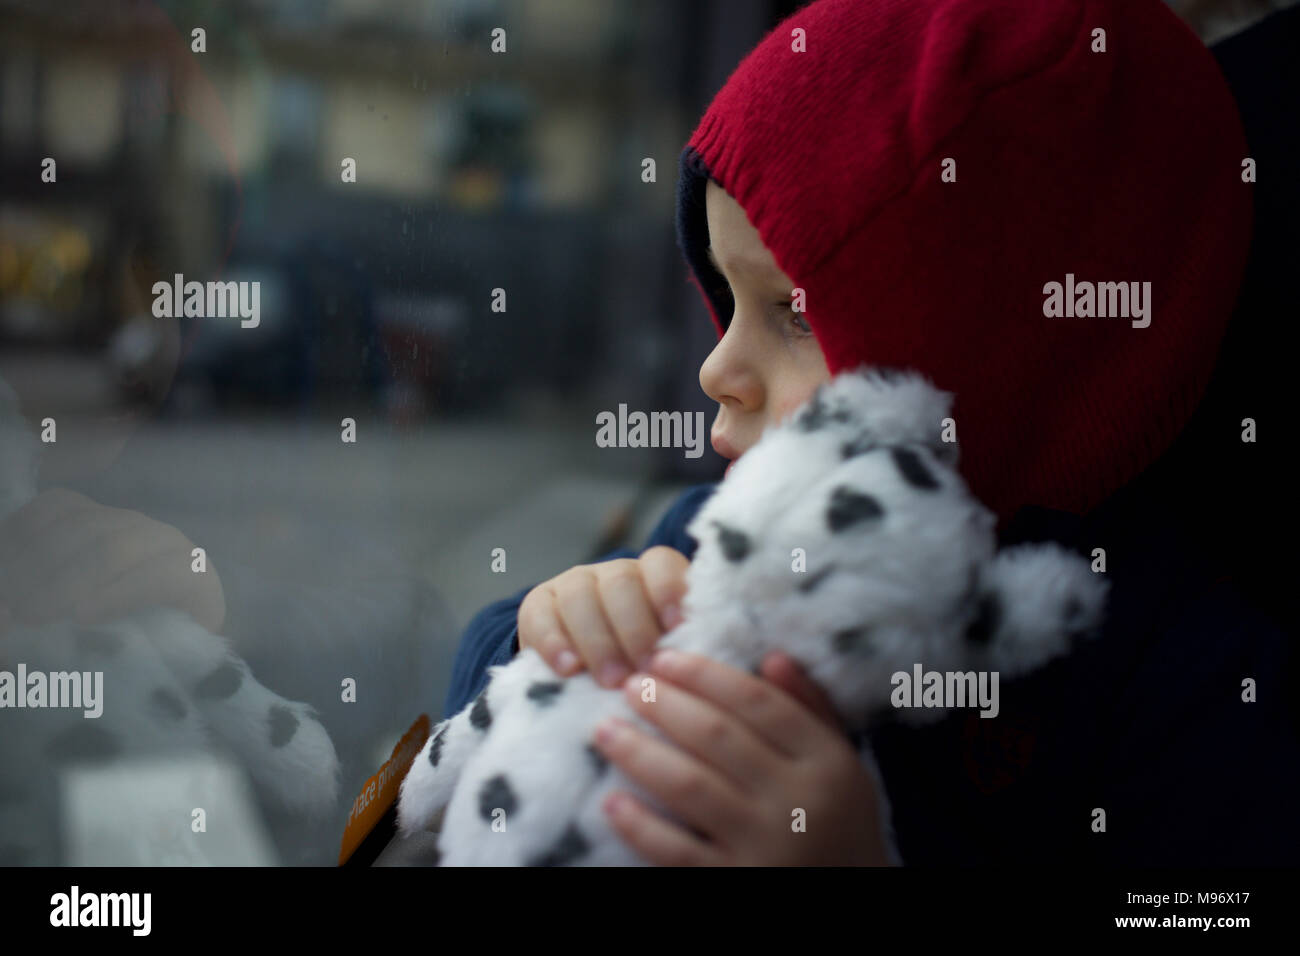 Child Holding Soft Toy Travelling on Bus, Looking out of Window Stock Photo